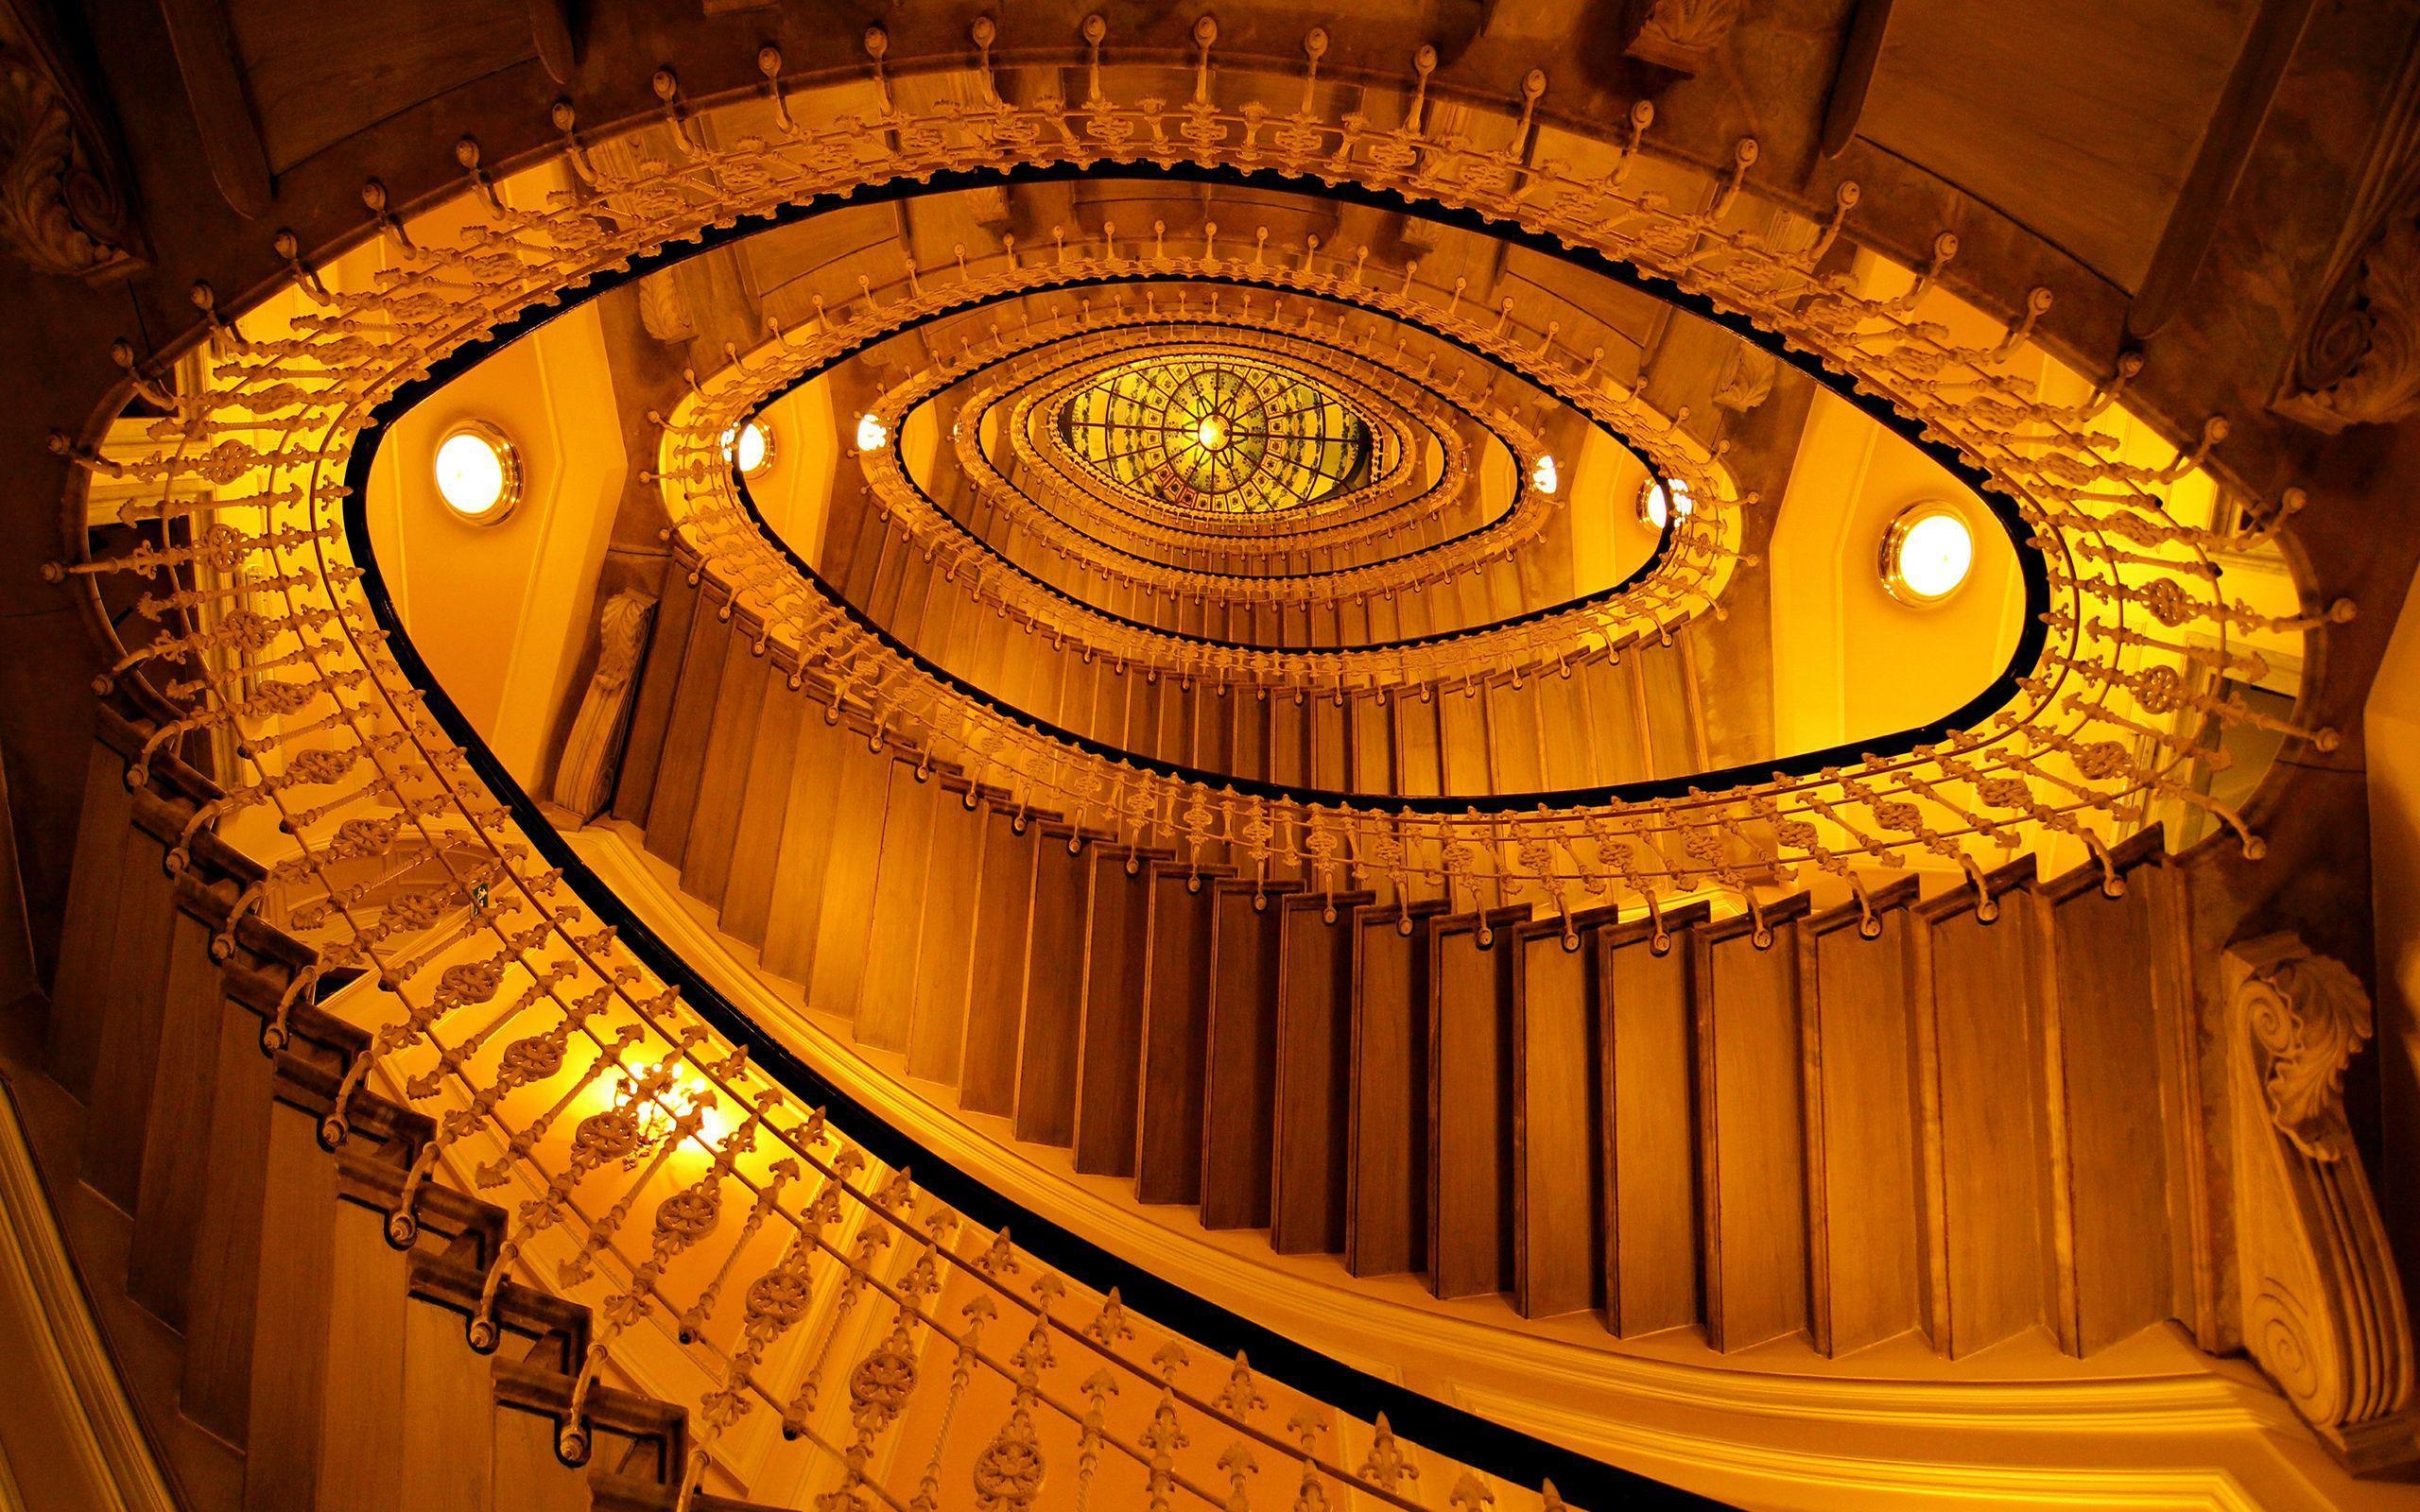 Golden Ratio: Spiral stairs, Architecture, Correct proportion, Symmetry section, Warm lights. 2560x1600 HD Wallpaper.